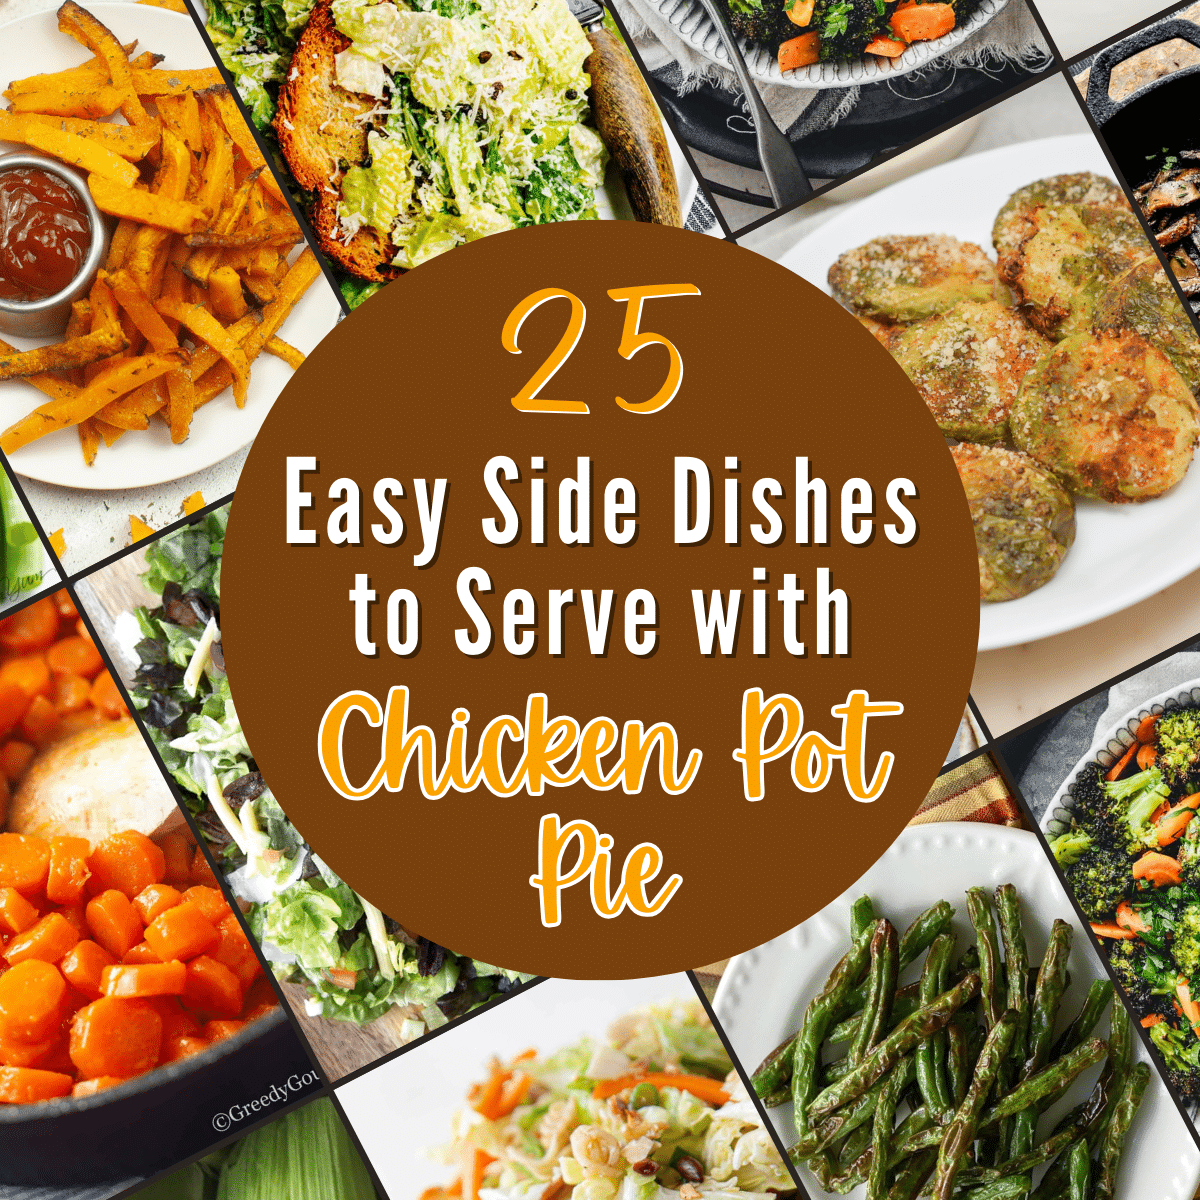 25 easy side dishes to serve with chicken pot pie.